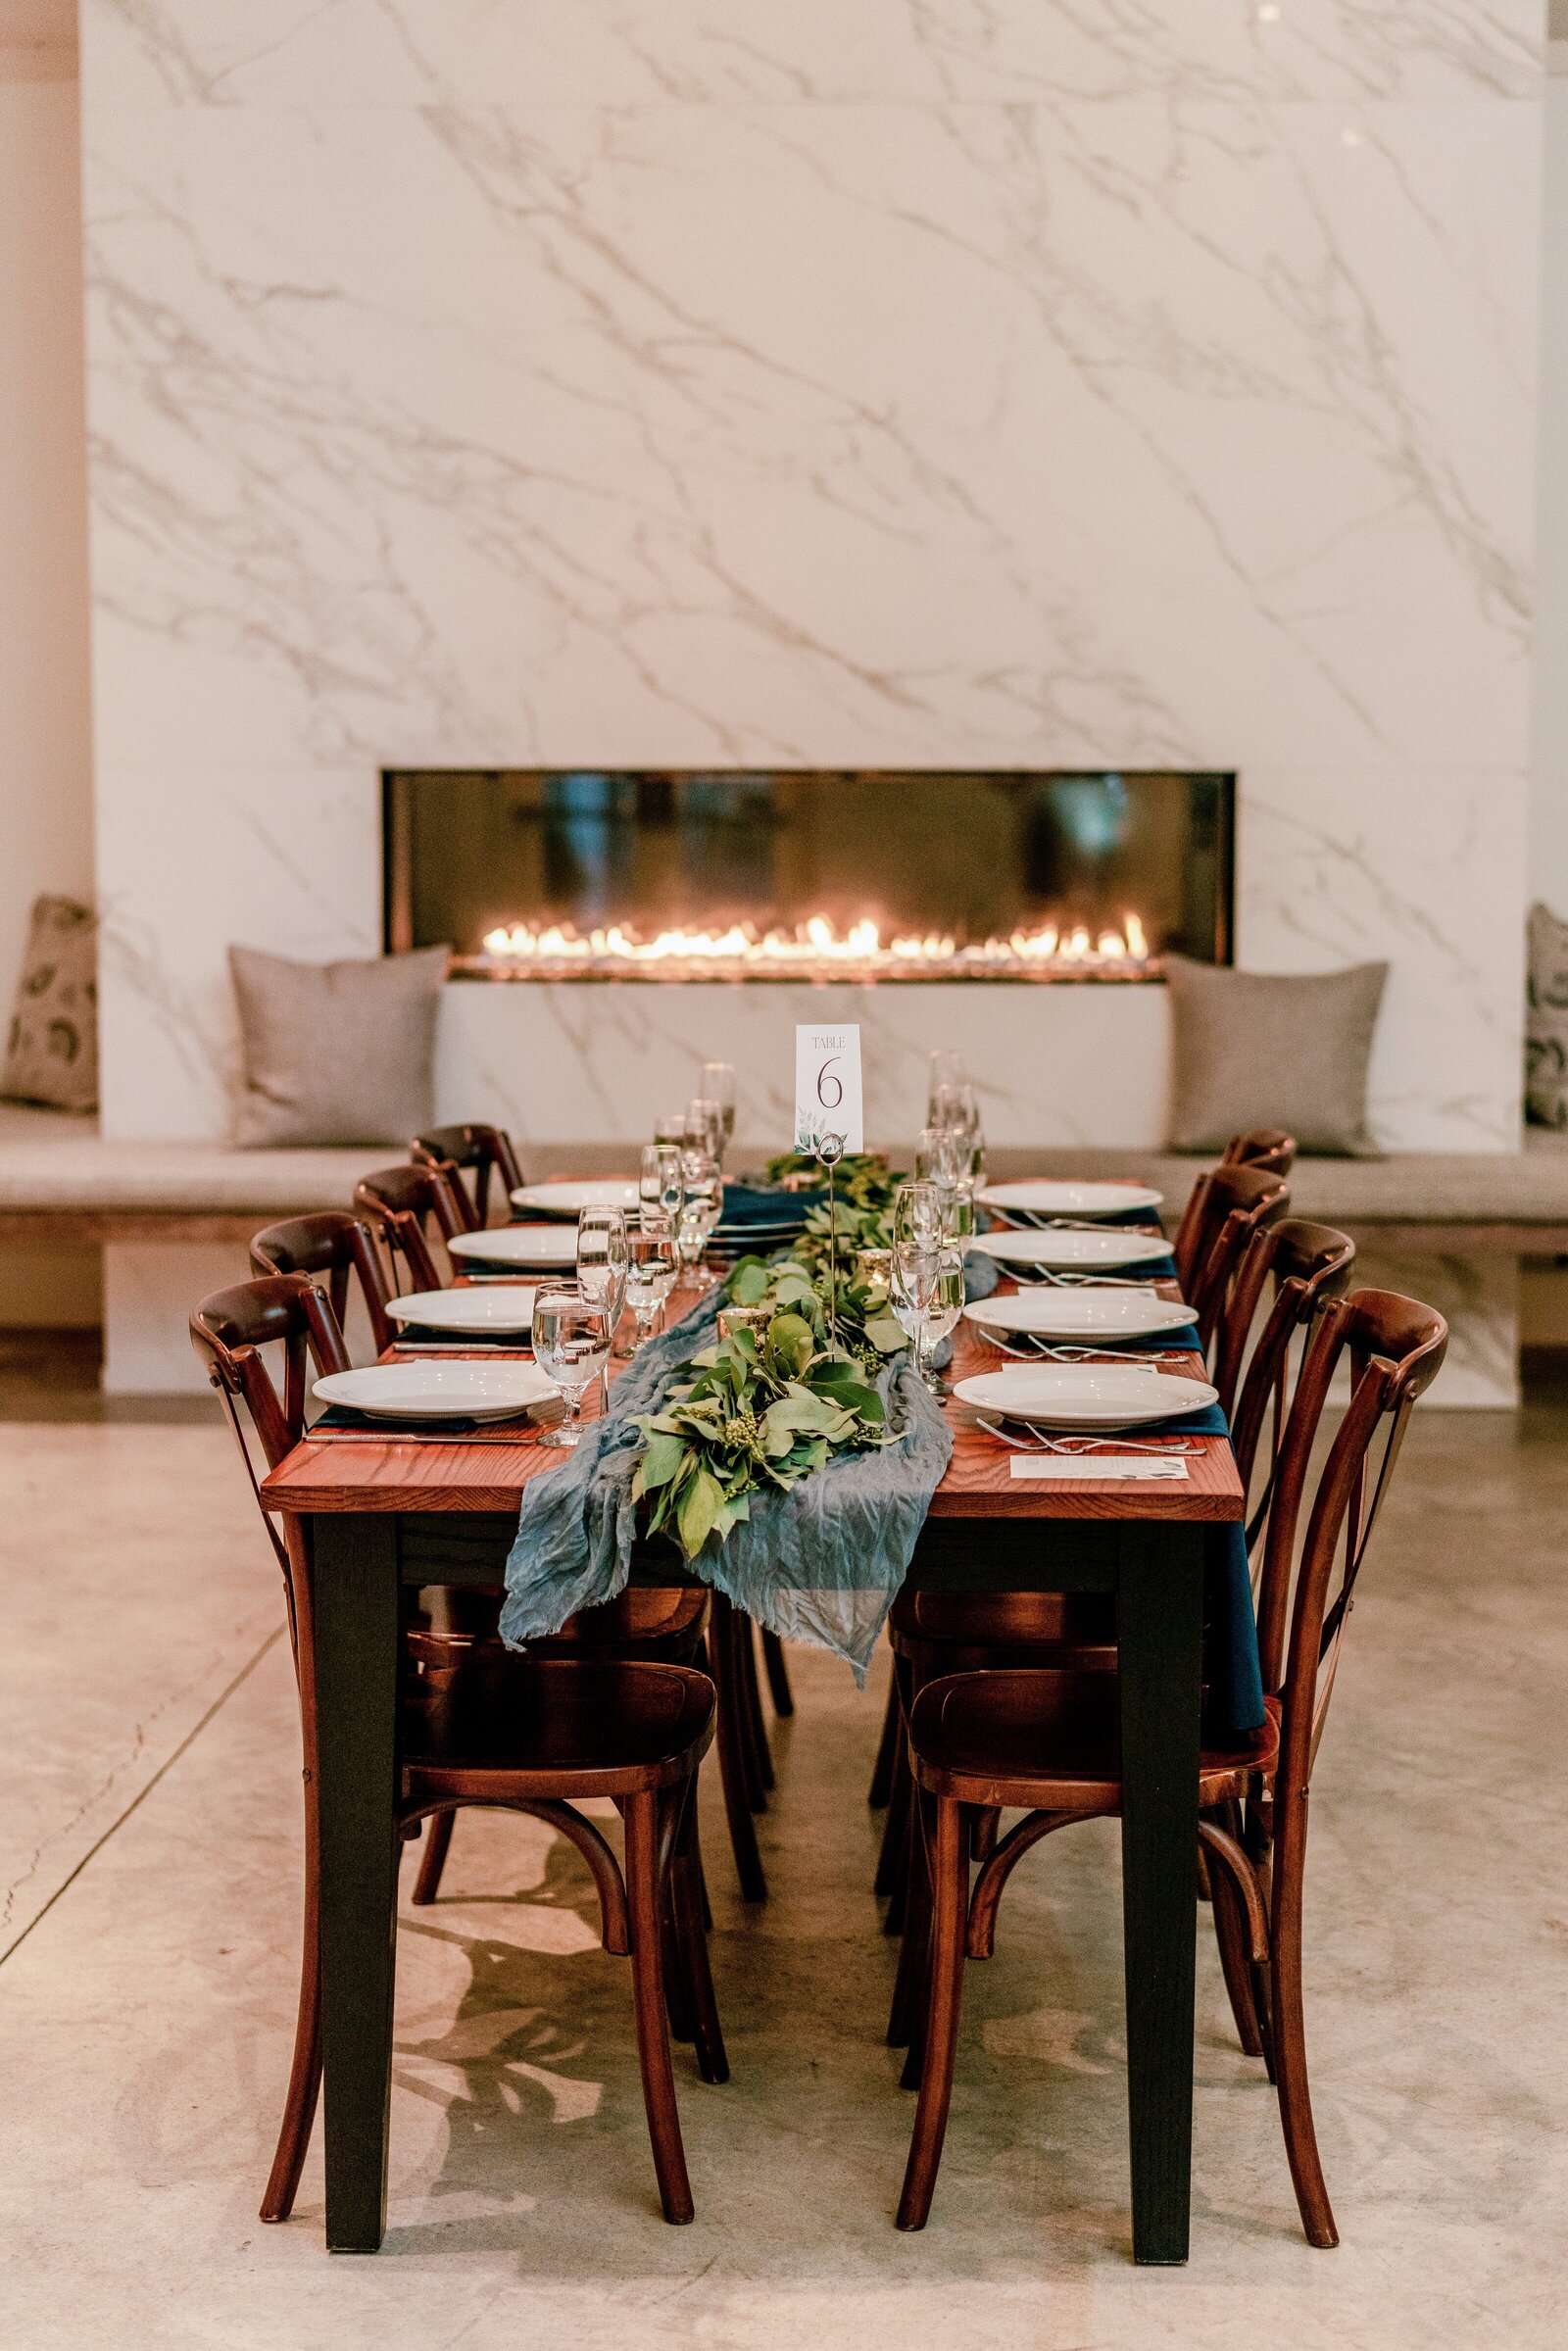 A reception table in front of a marble fireplace for a wedding at Fleetwood Farm Winery in Loudoun County